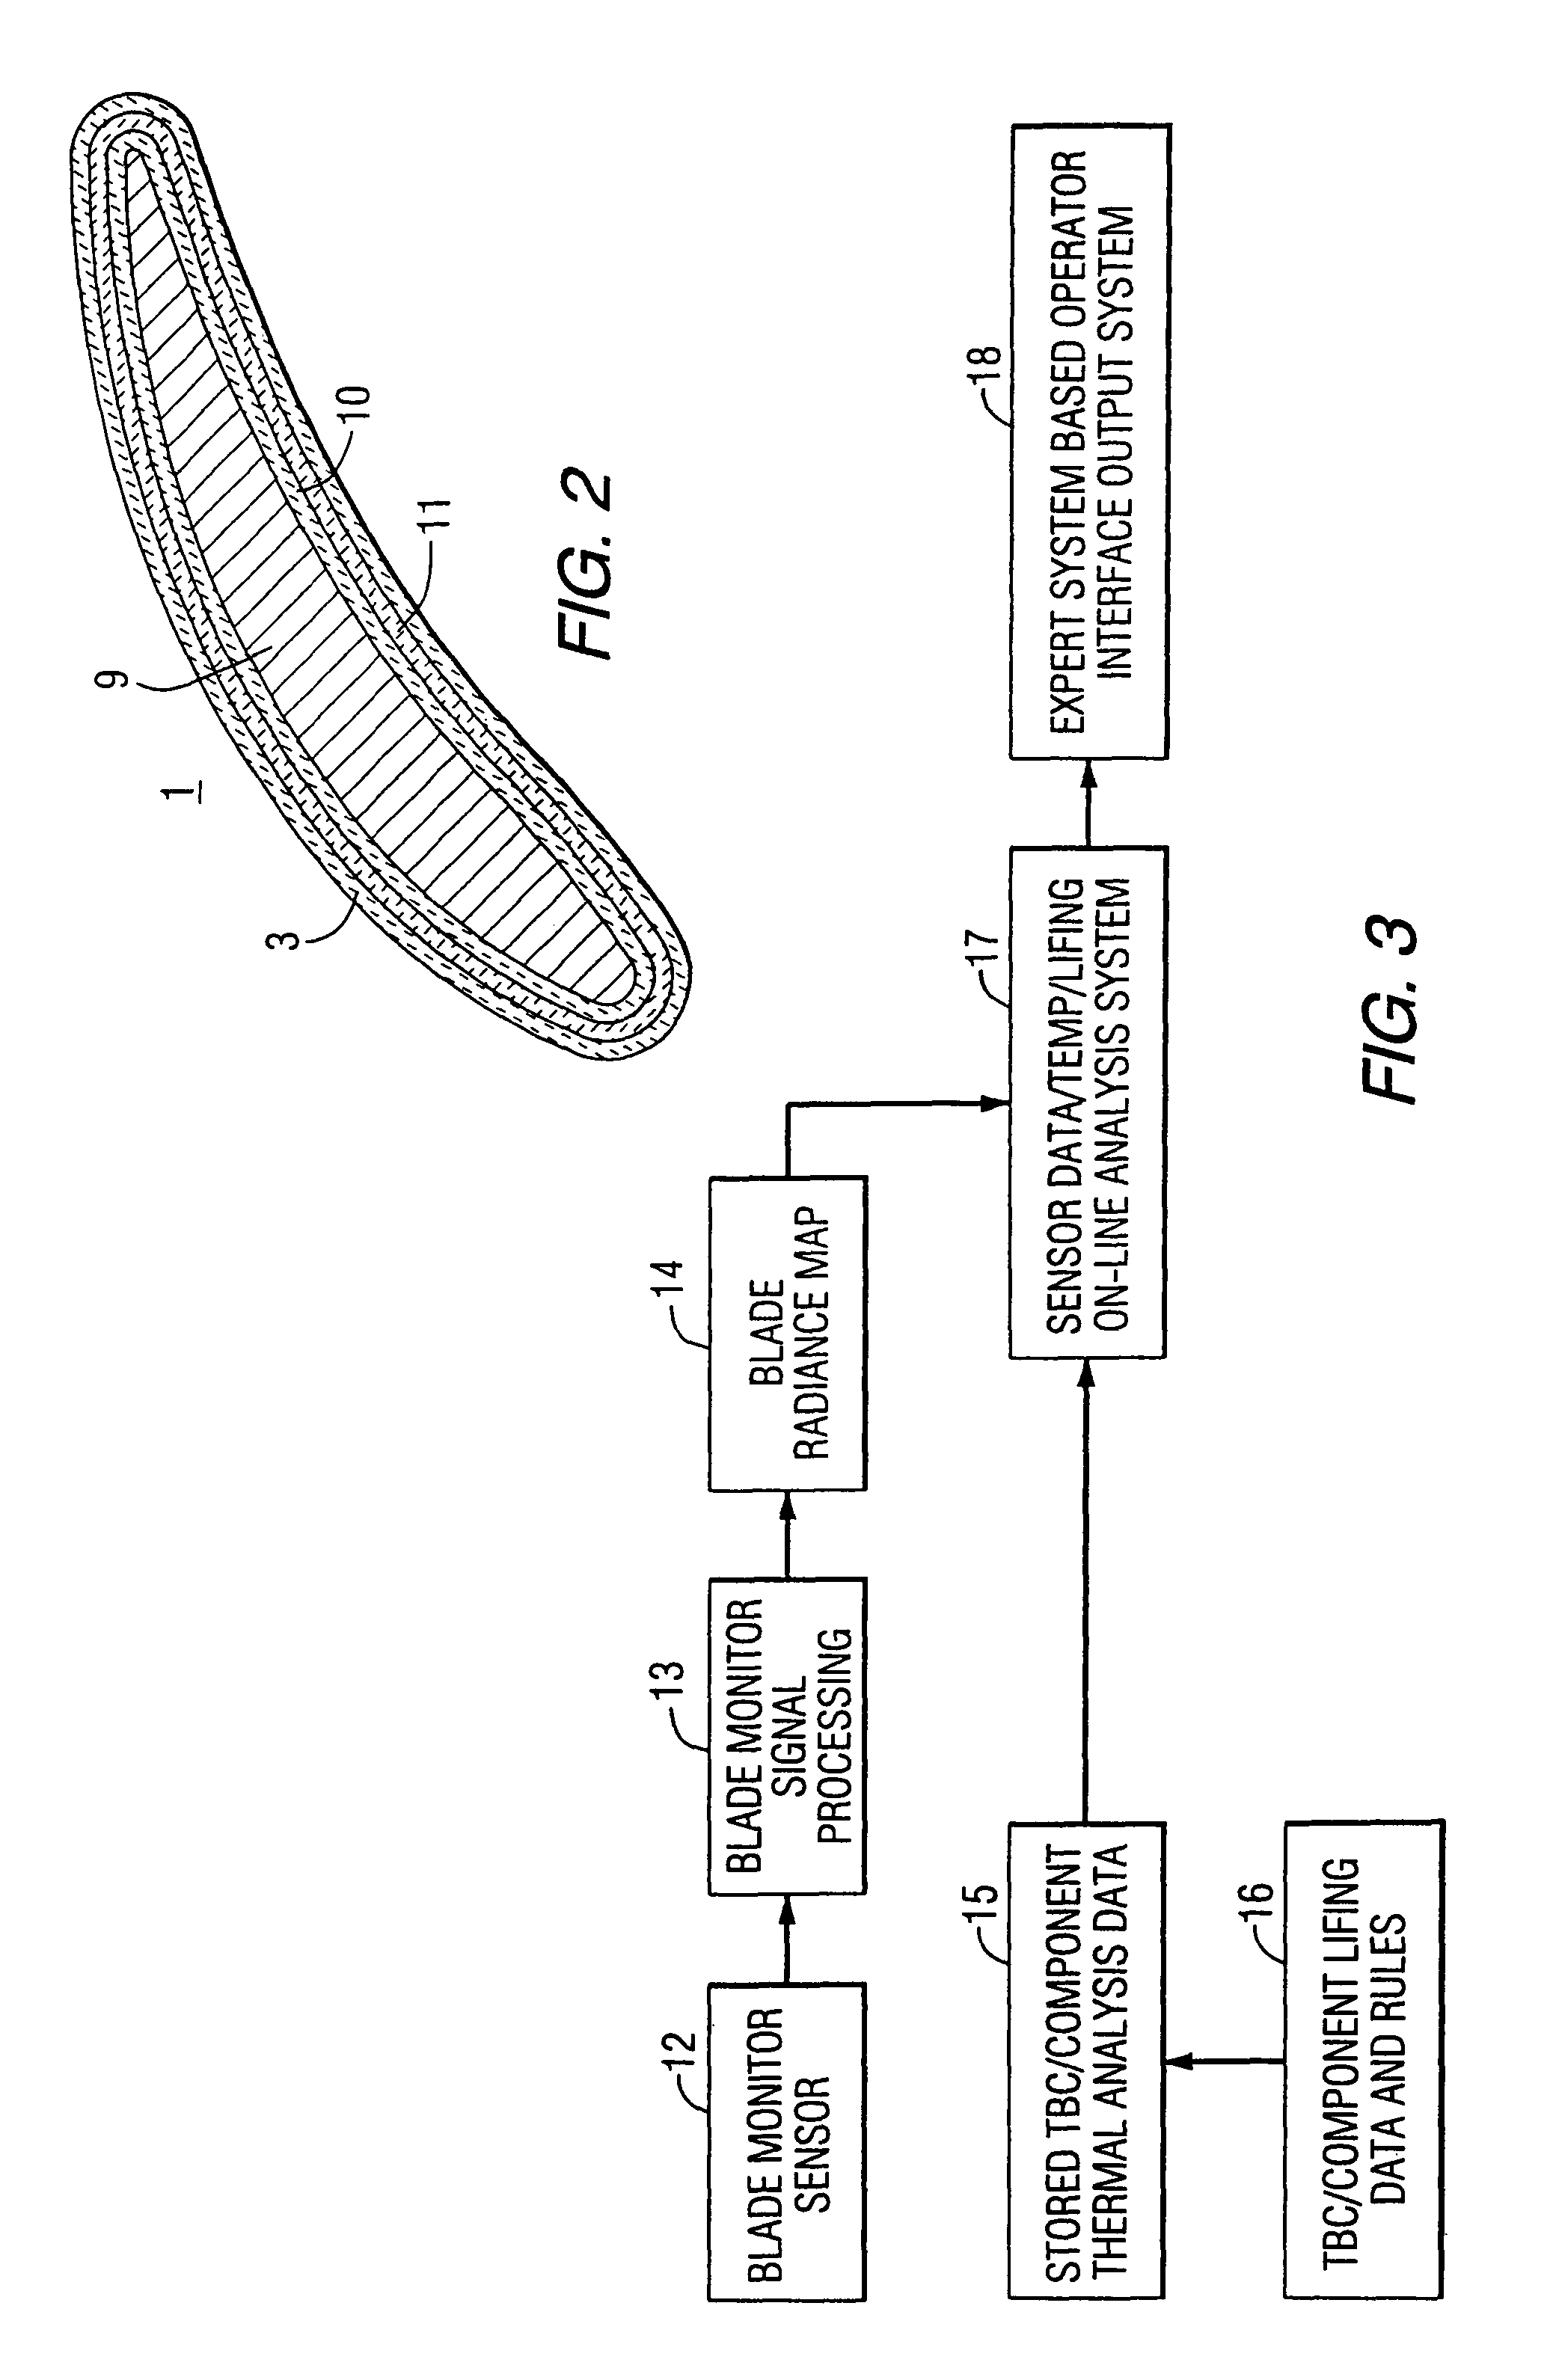 Method and apparatus for measuring on-line failure of turbine thermal barrier coatings